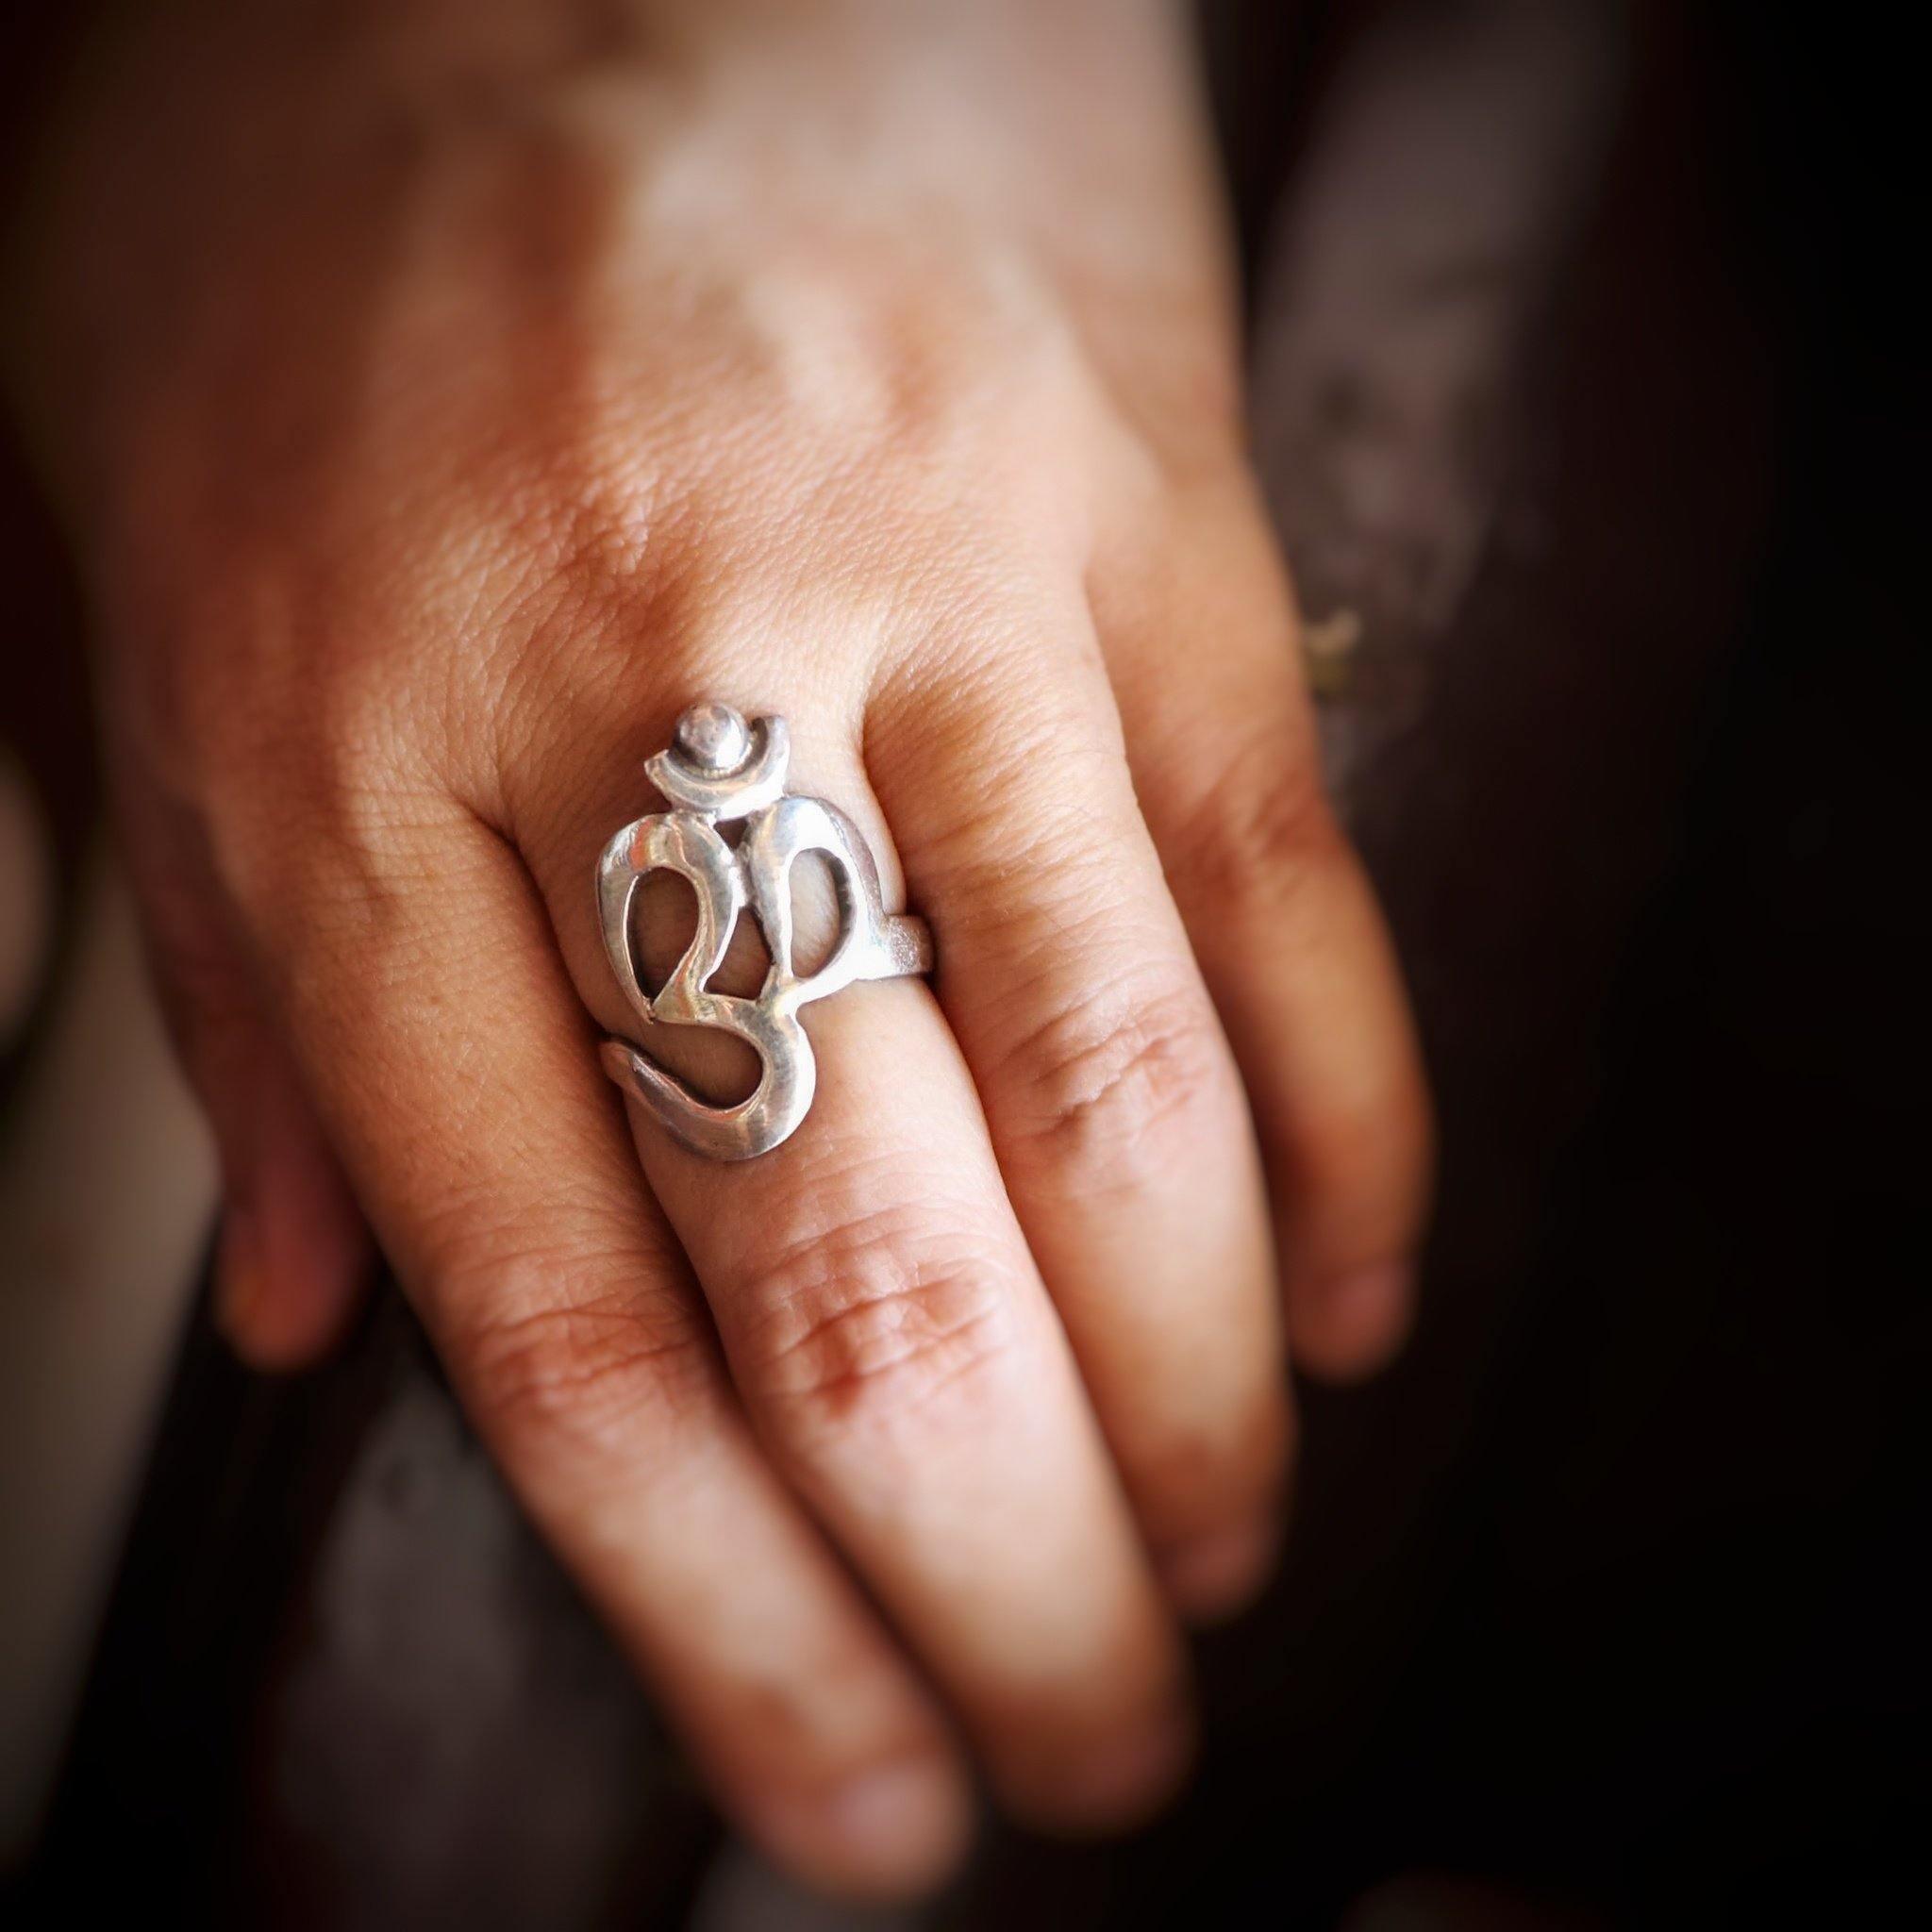 OM (AUM) Sterling Silver Ring | Exotic India Art